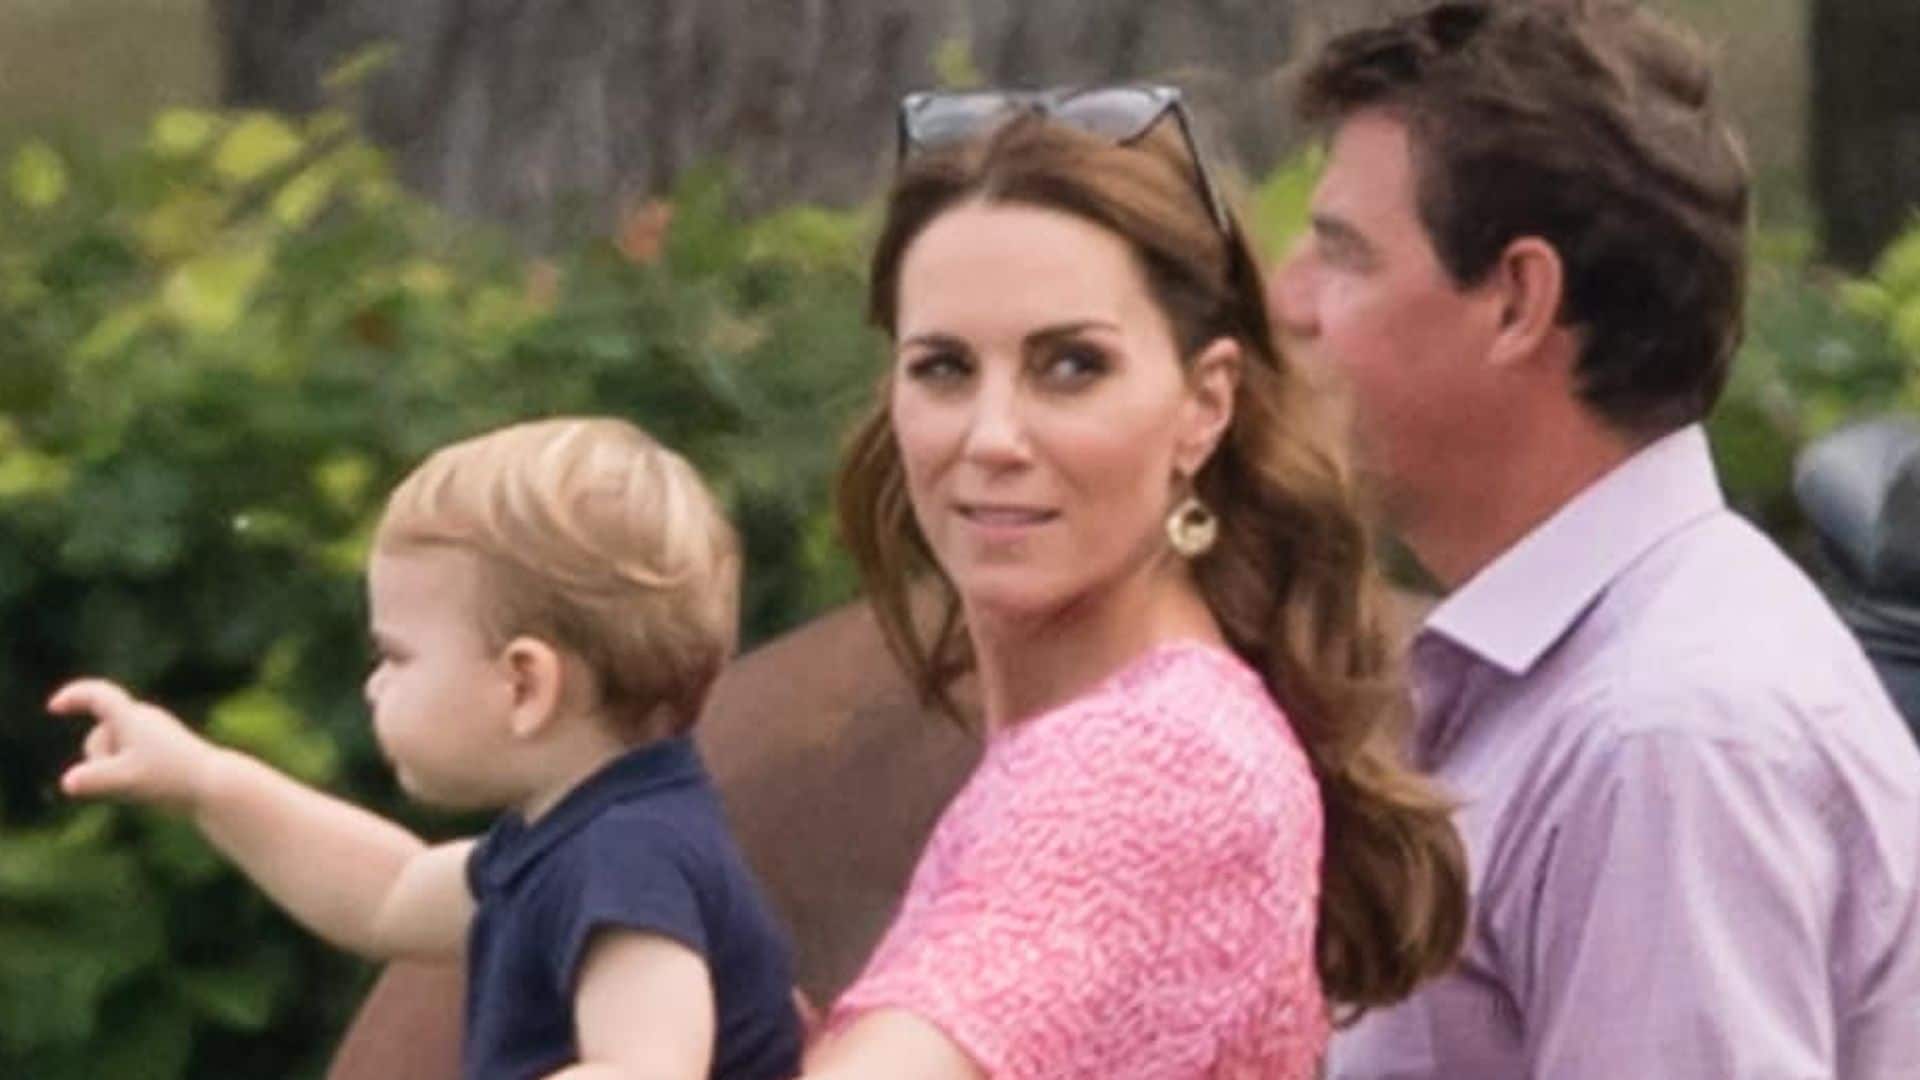 Kate Middleton serves major style points at charity polo match in a pretty pink dress